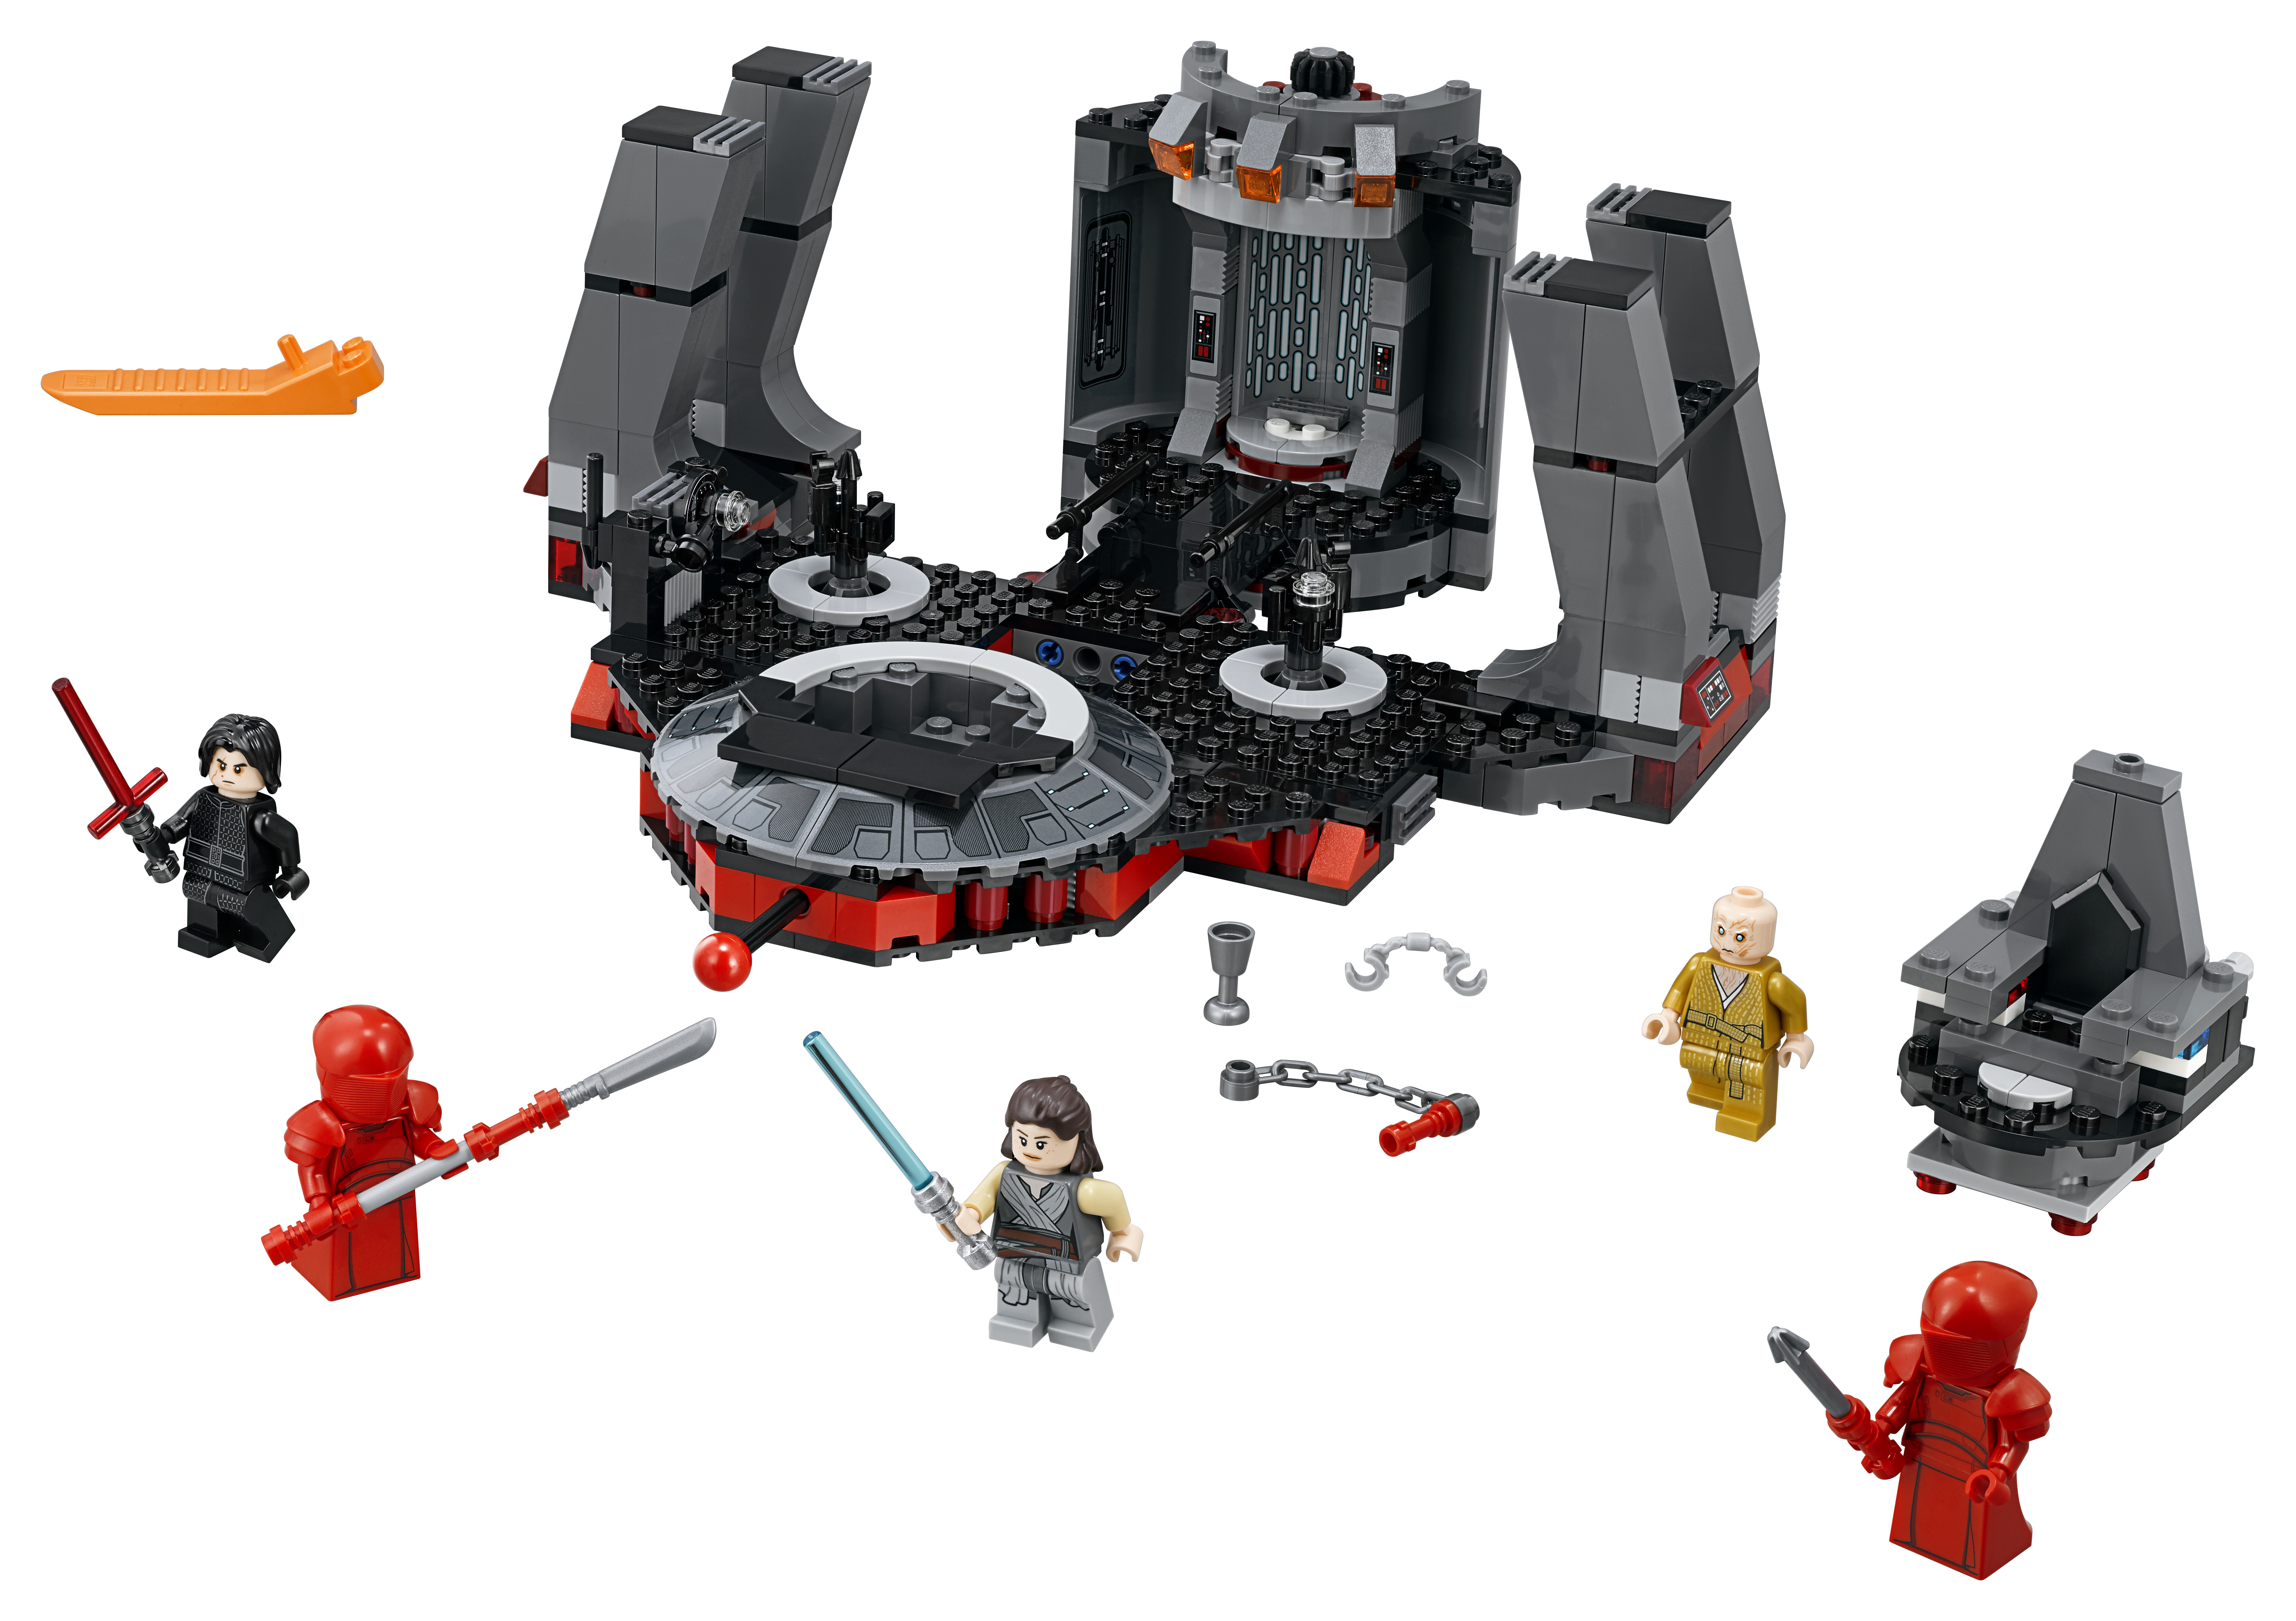 Preview of LEGO Star Wars Fall Assortment - FBTB